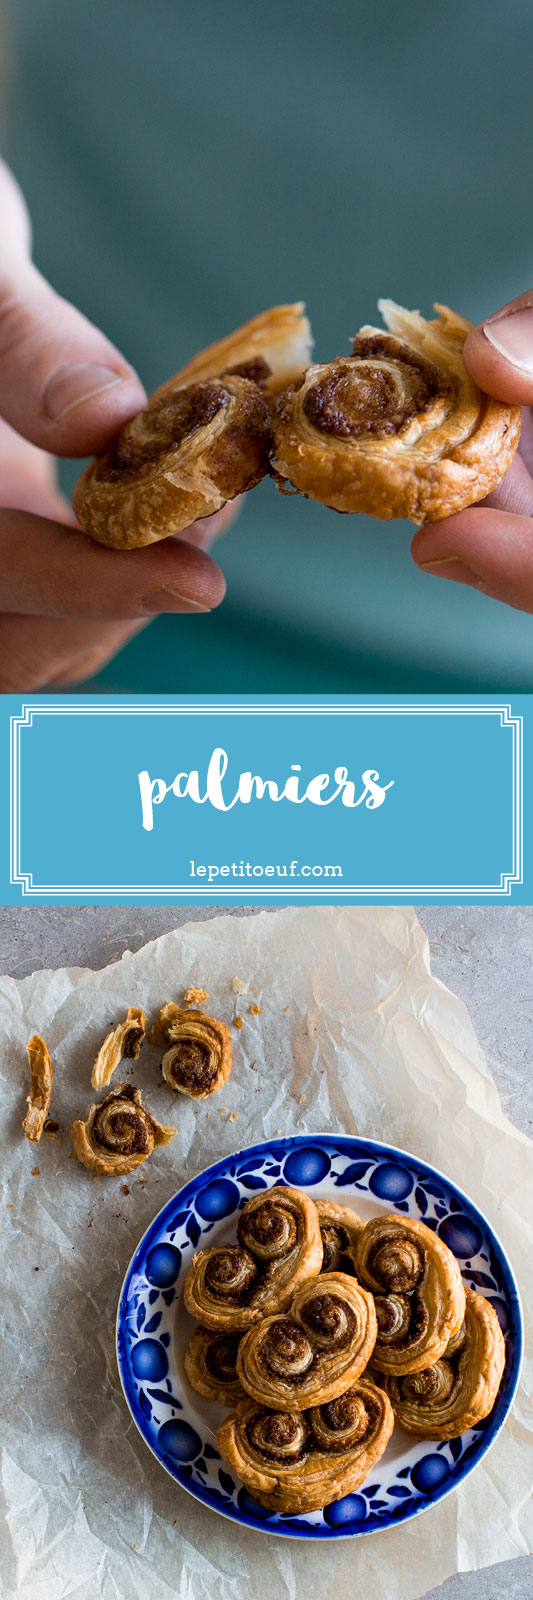 Home cooked palmiers take a few minutes to prepare, are quick to cook and can be flavoured however you want, be it sweet or savoury, meat or meatfree, cheese or chocolate. Great for kids to play around with and awesome to impress your guests when you whip your home made pastries out of the oven!